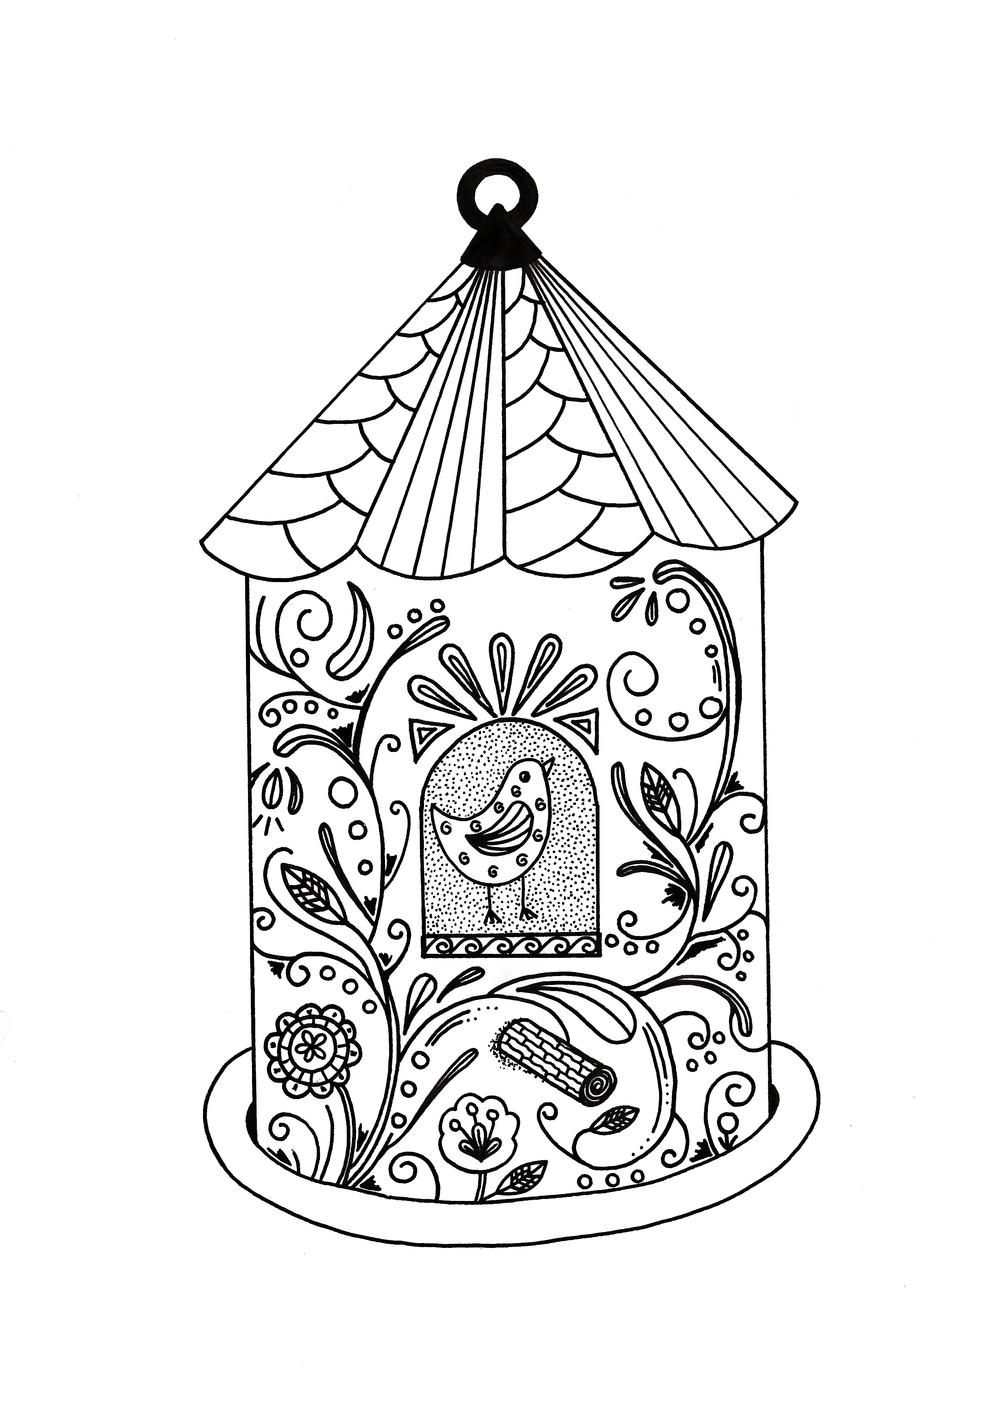 Whimsical Bird House Adult Coloring Page | FaveCrafts.com